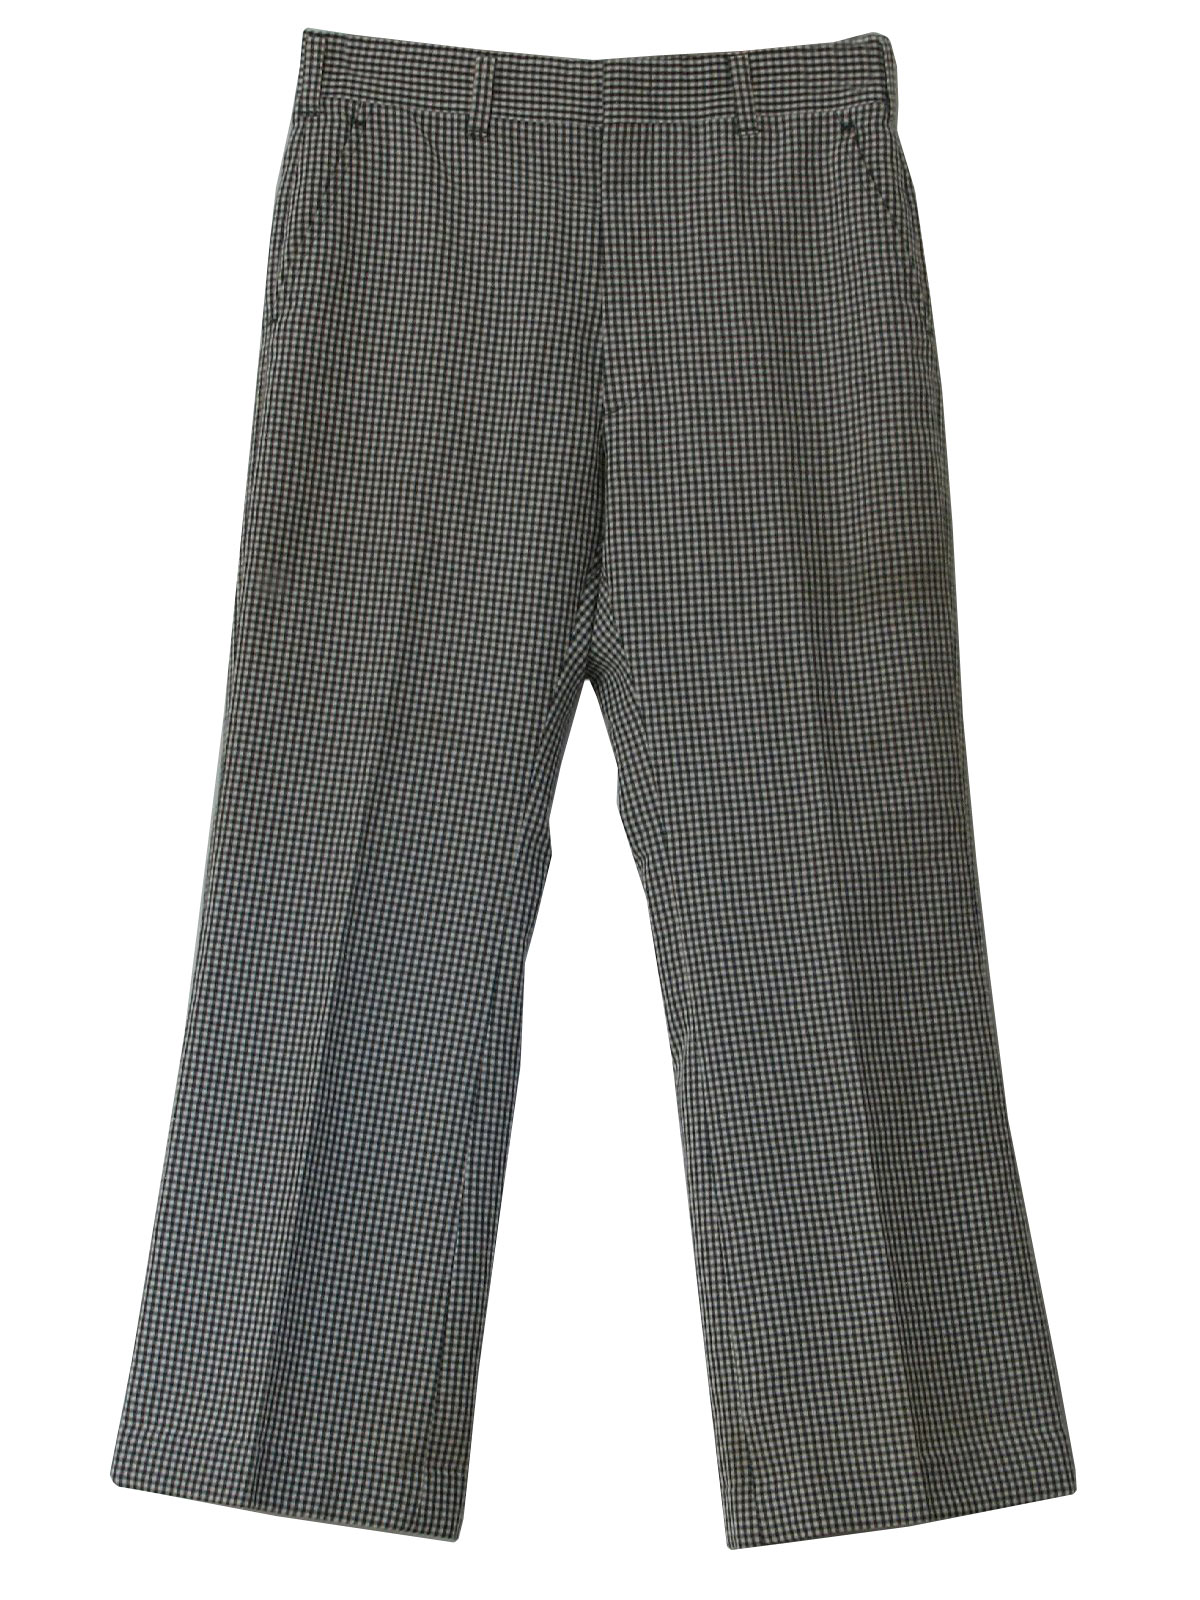 70s Retro Pants: 70s -Haggar- Mens forest green, off white and red ...